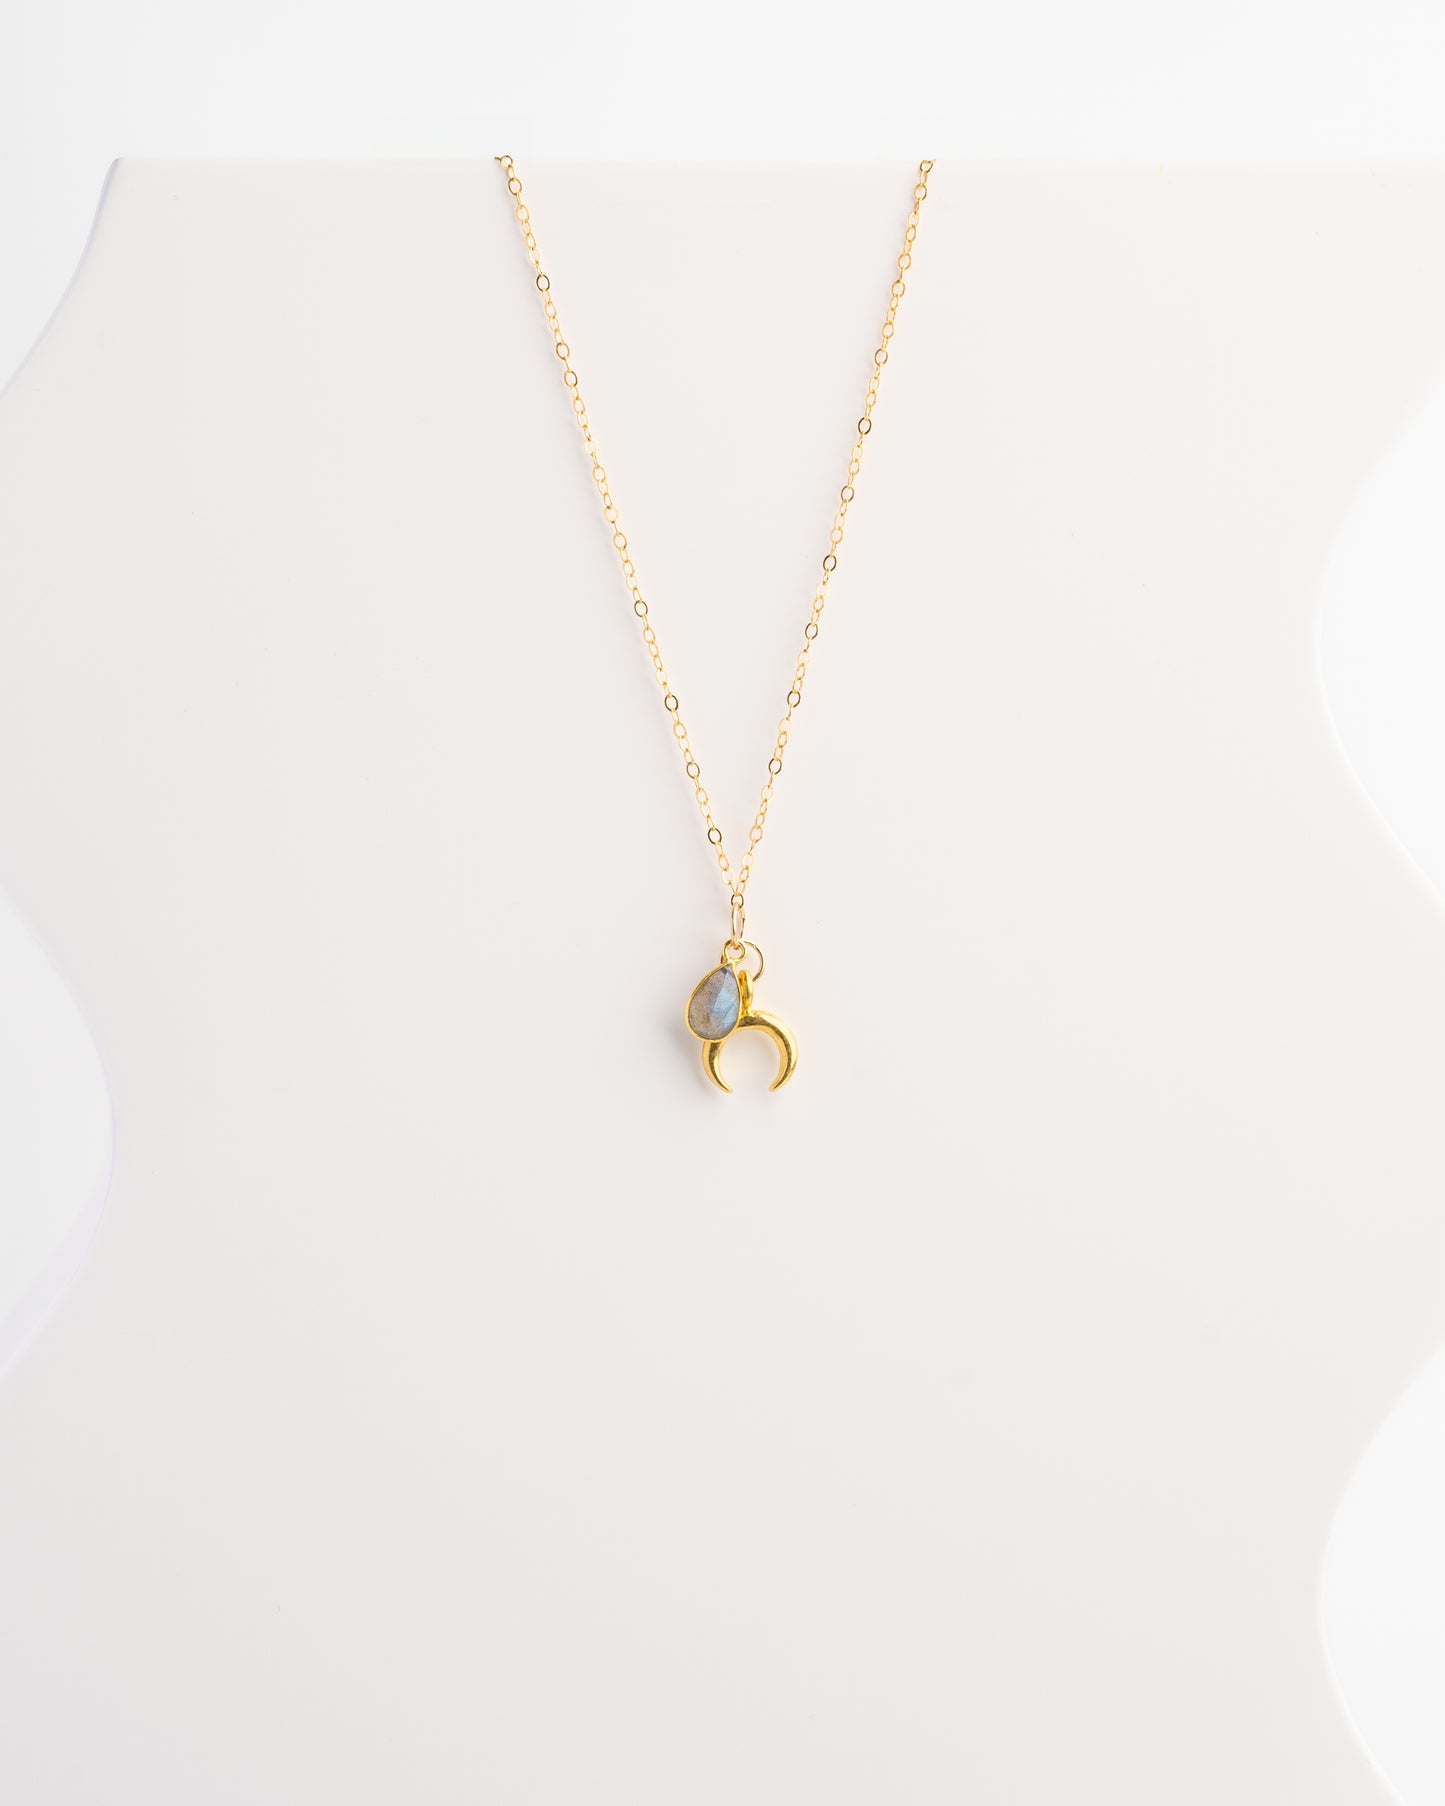 Moonchild necklace with Moonstone or Labradorite | perfect for layering your favorite necklaces and gemstones